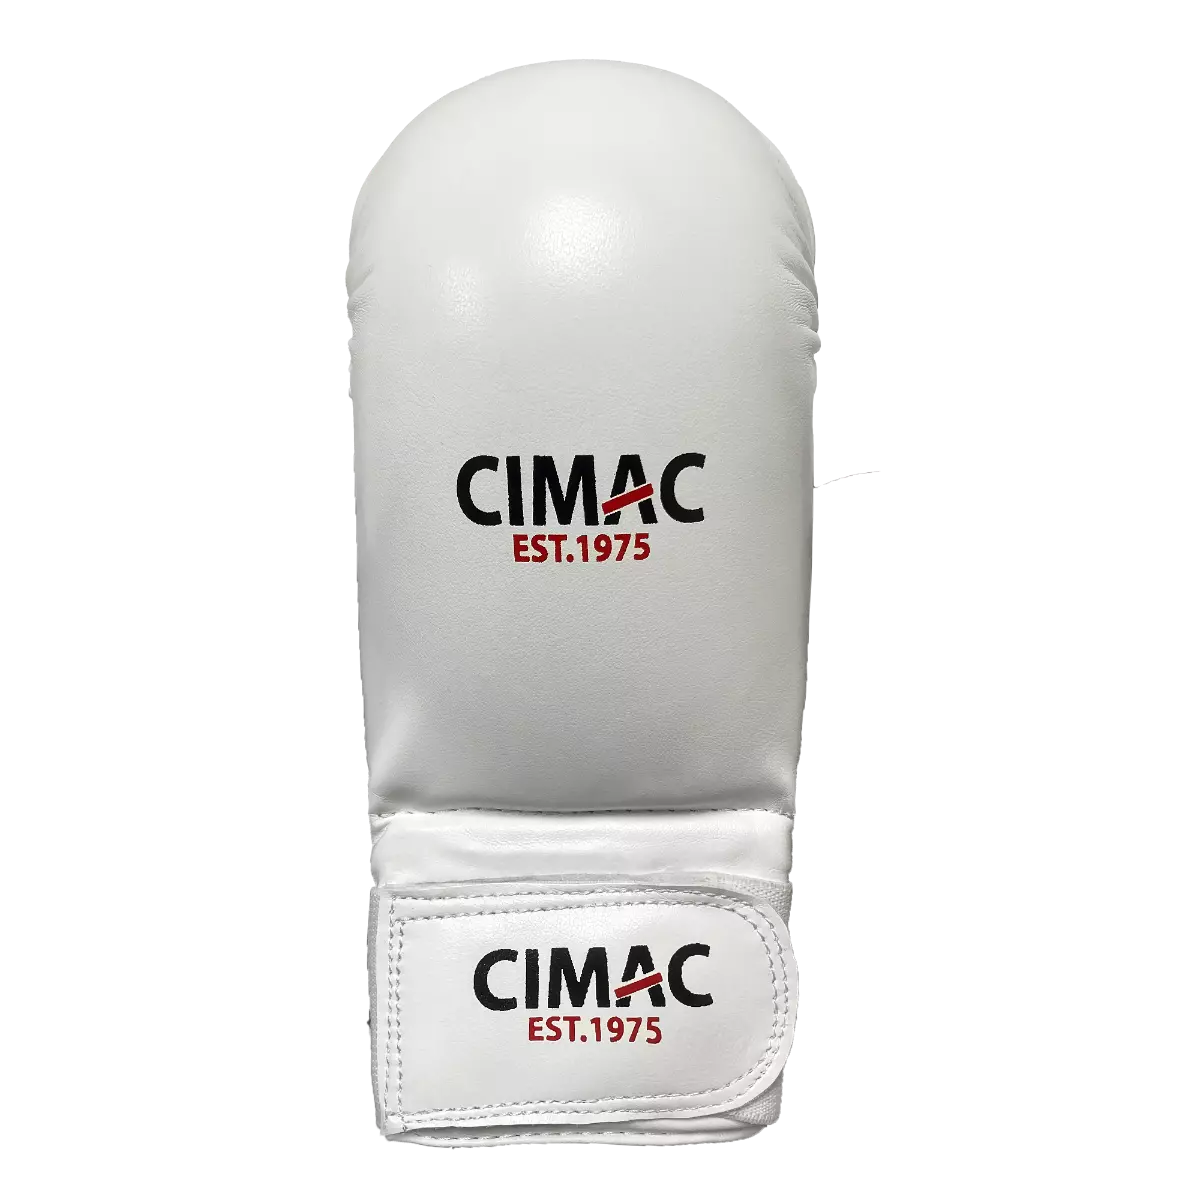 Cimac Karate Mitts Without Thumb Competition Gloves